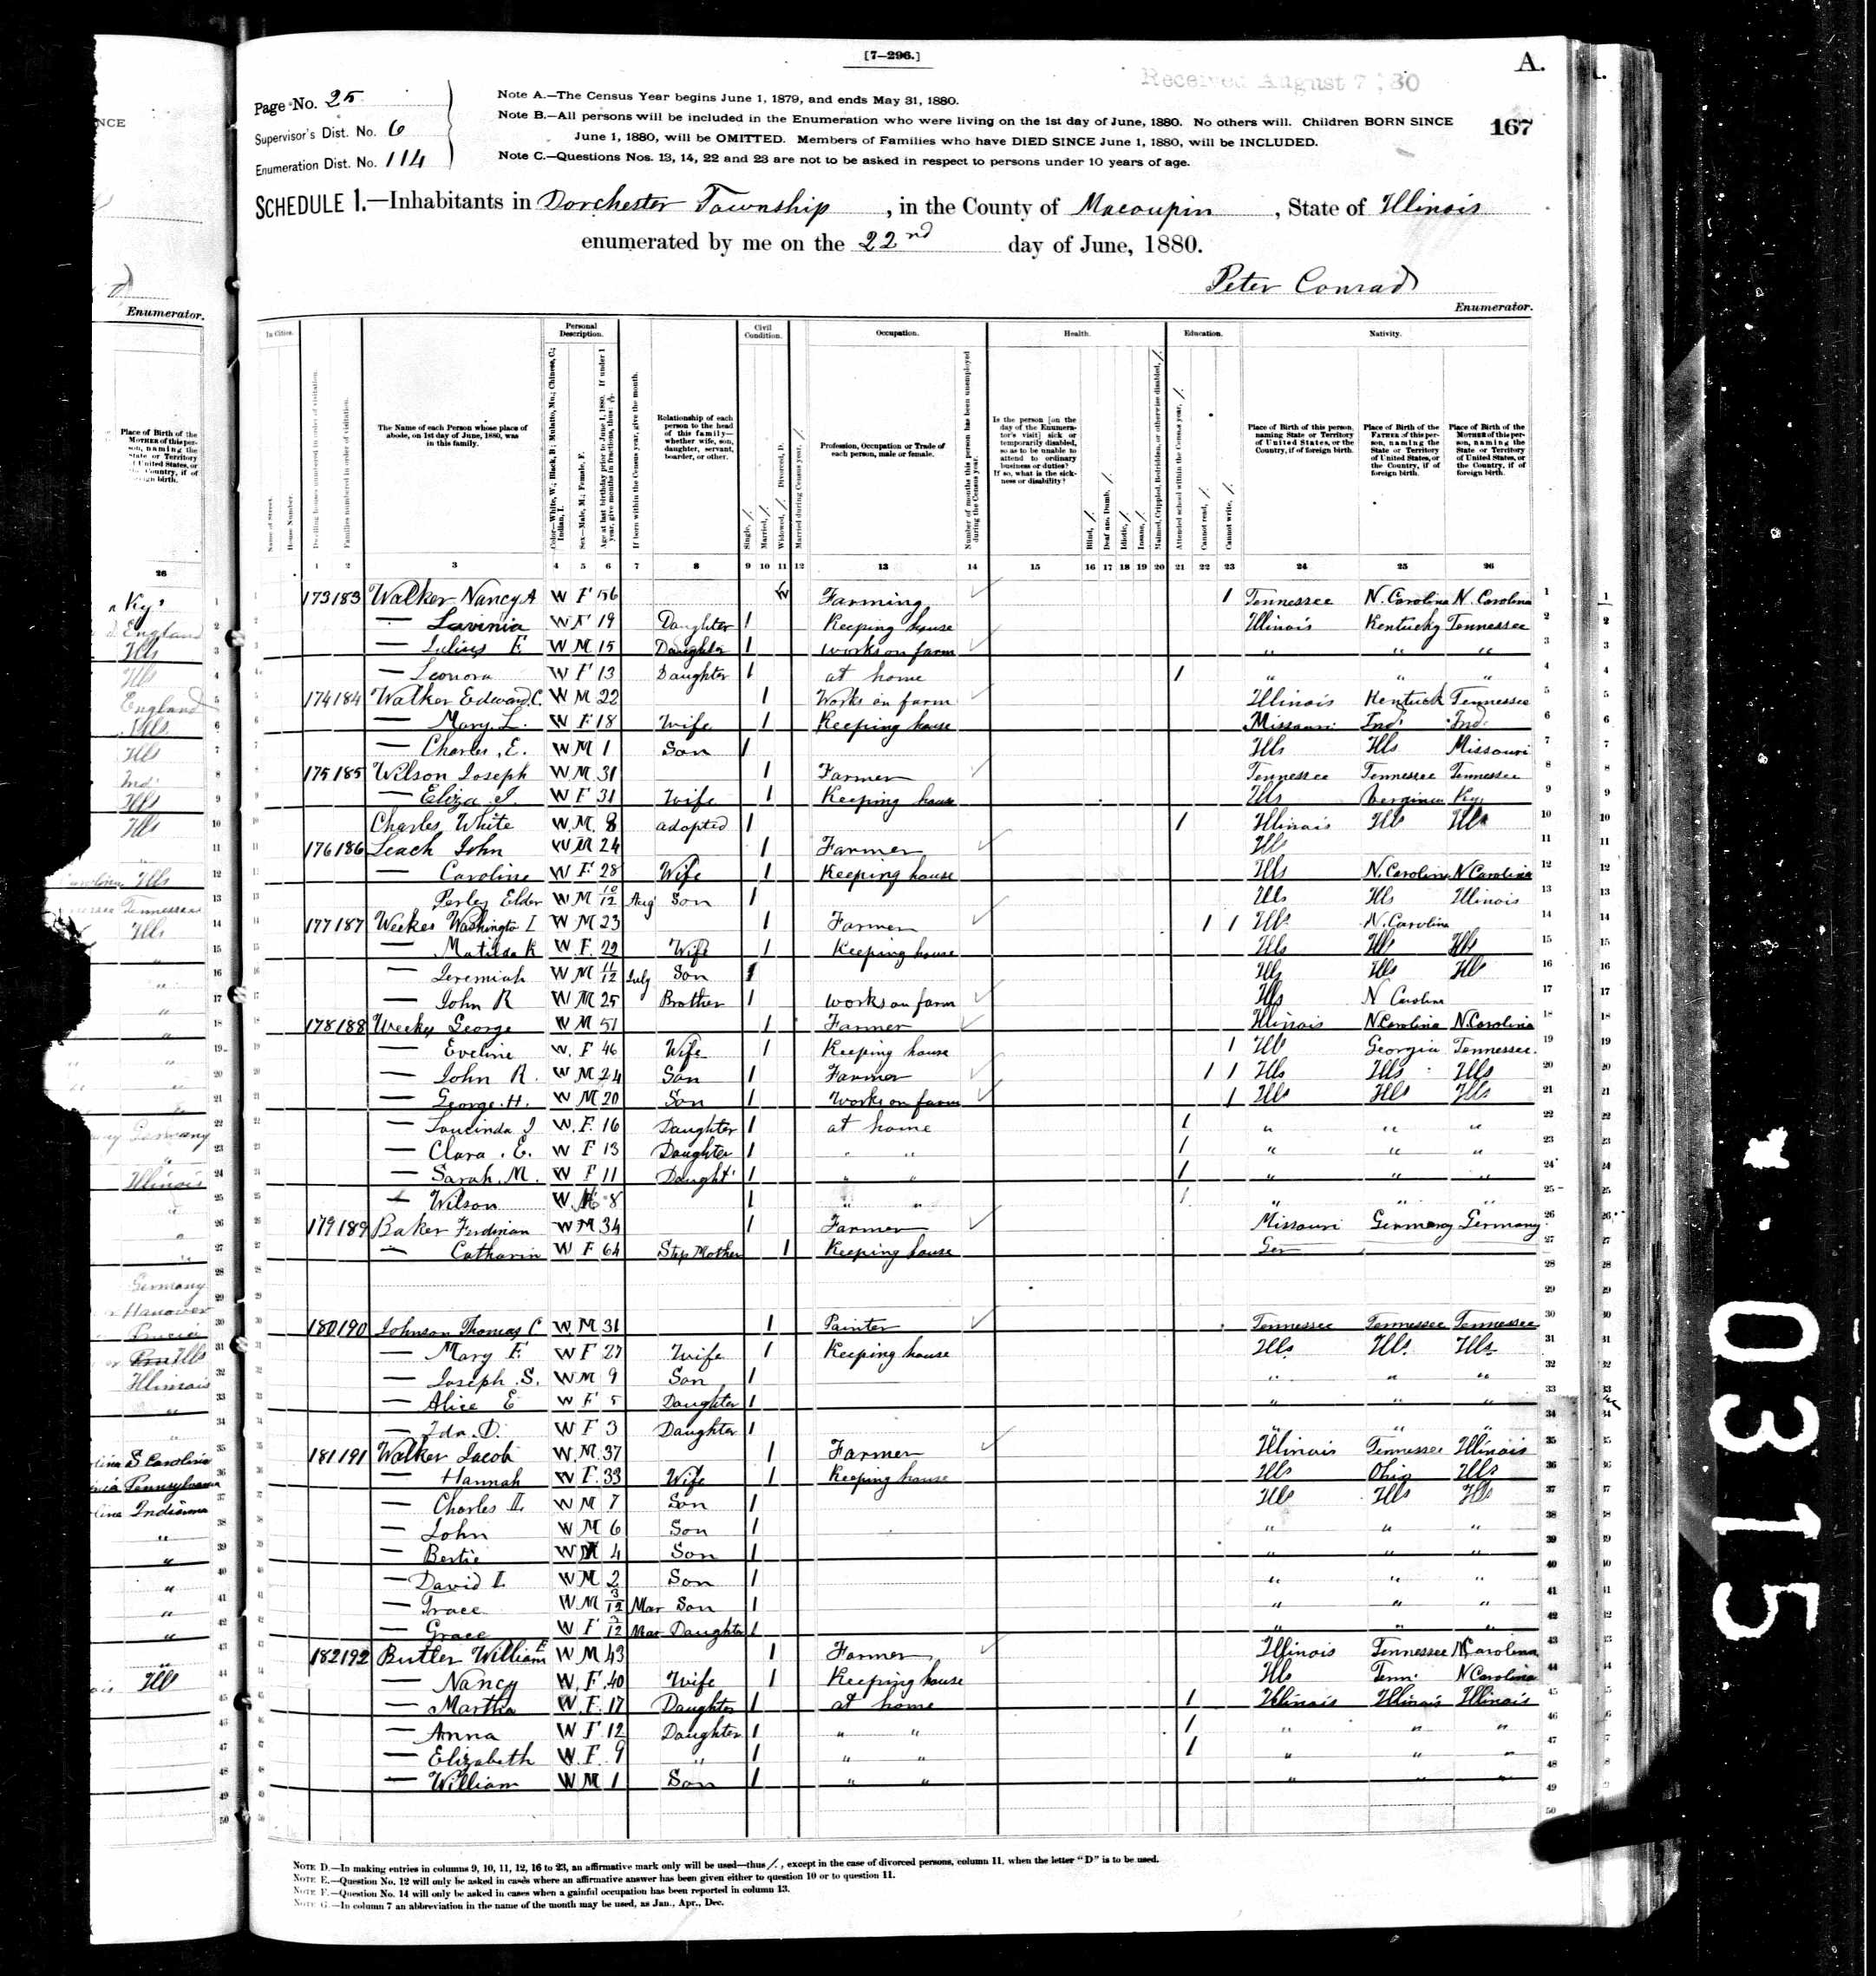 Jacob Walker, son of James and Mary (Bentley) Walker, and wife Hannah Jacobs, 1880 Macoupin County, Illinois, census